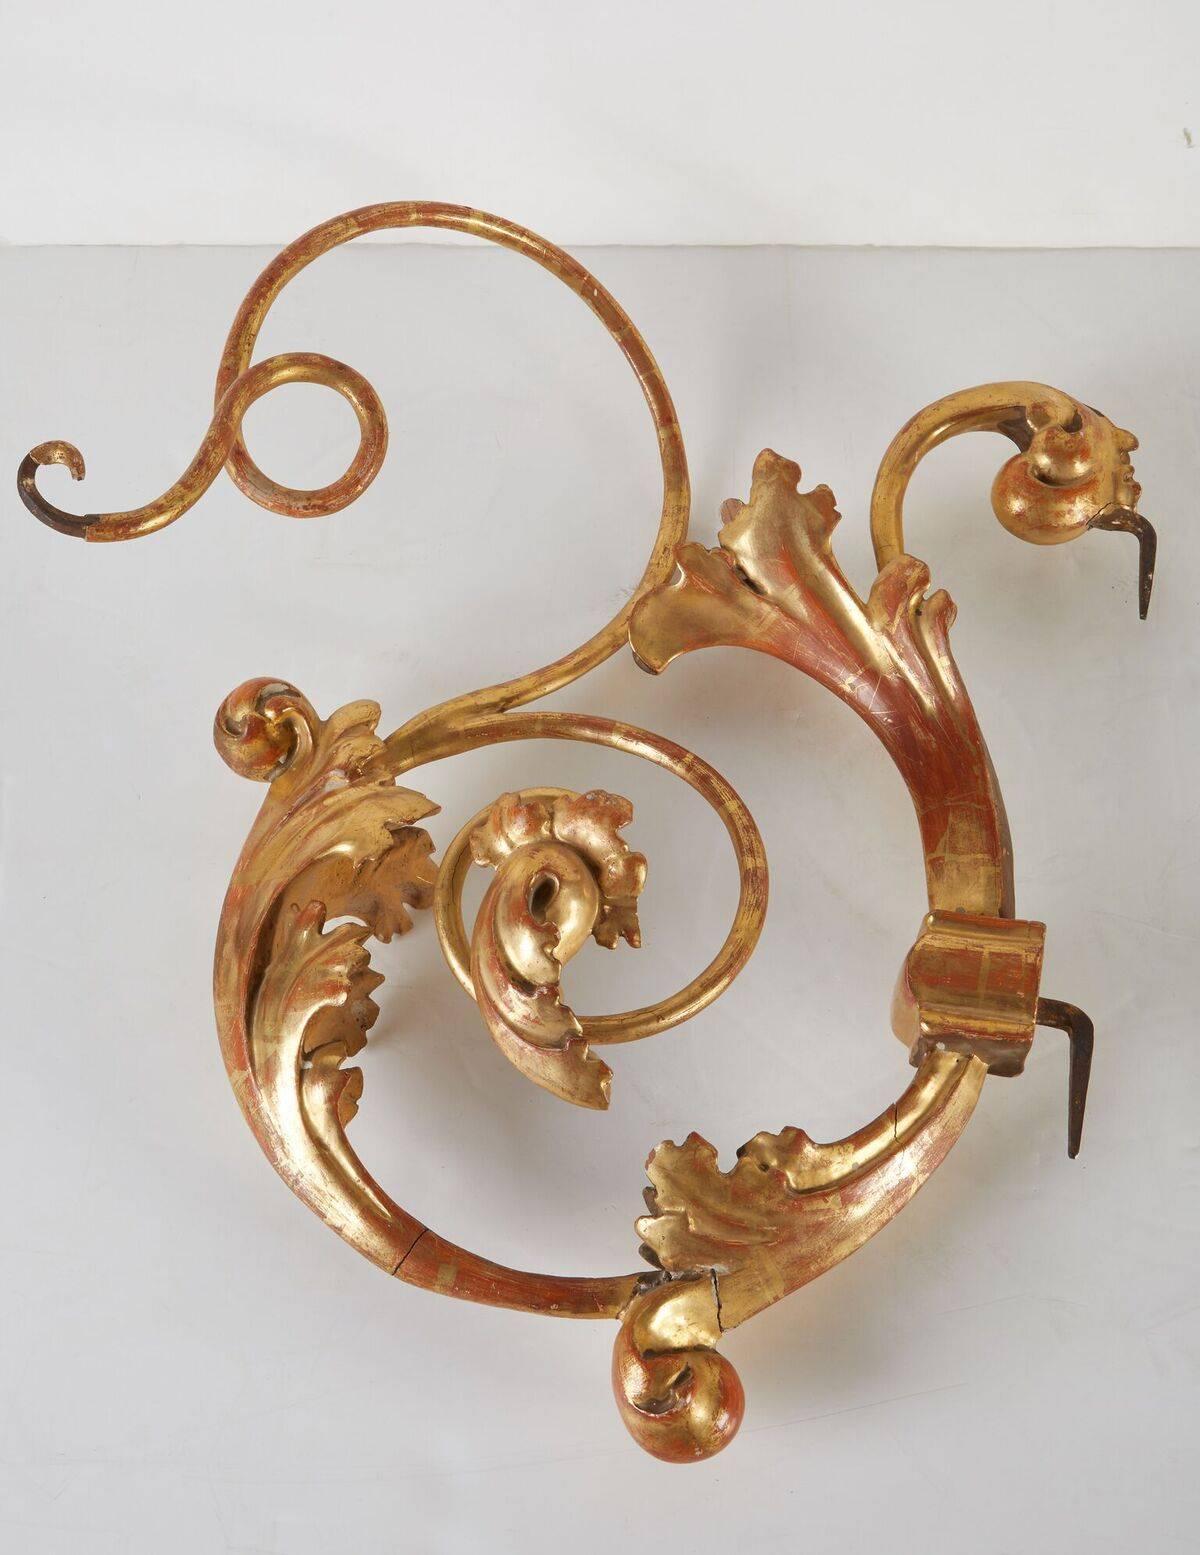 Pair of highly desirable, Italian, circa 1785, scrolling brackets in metal and wood. Both gessoed, and 22-karat gold gilded. The pair embellished with acanthus leaf sculptures and terminating in whirling, tapered tendrils. Initially used to hang